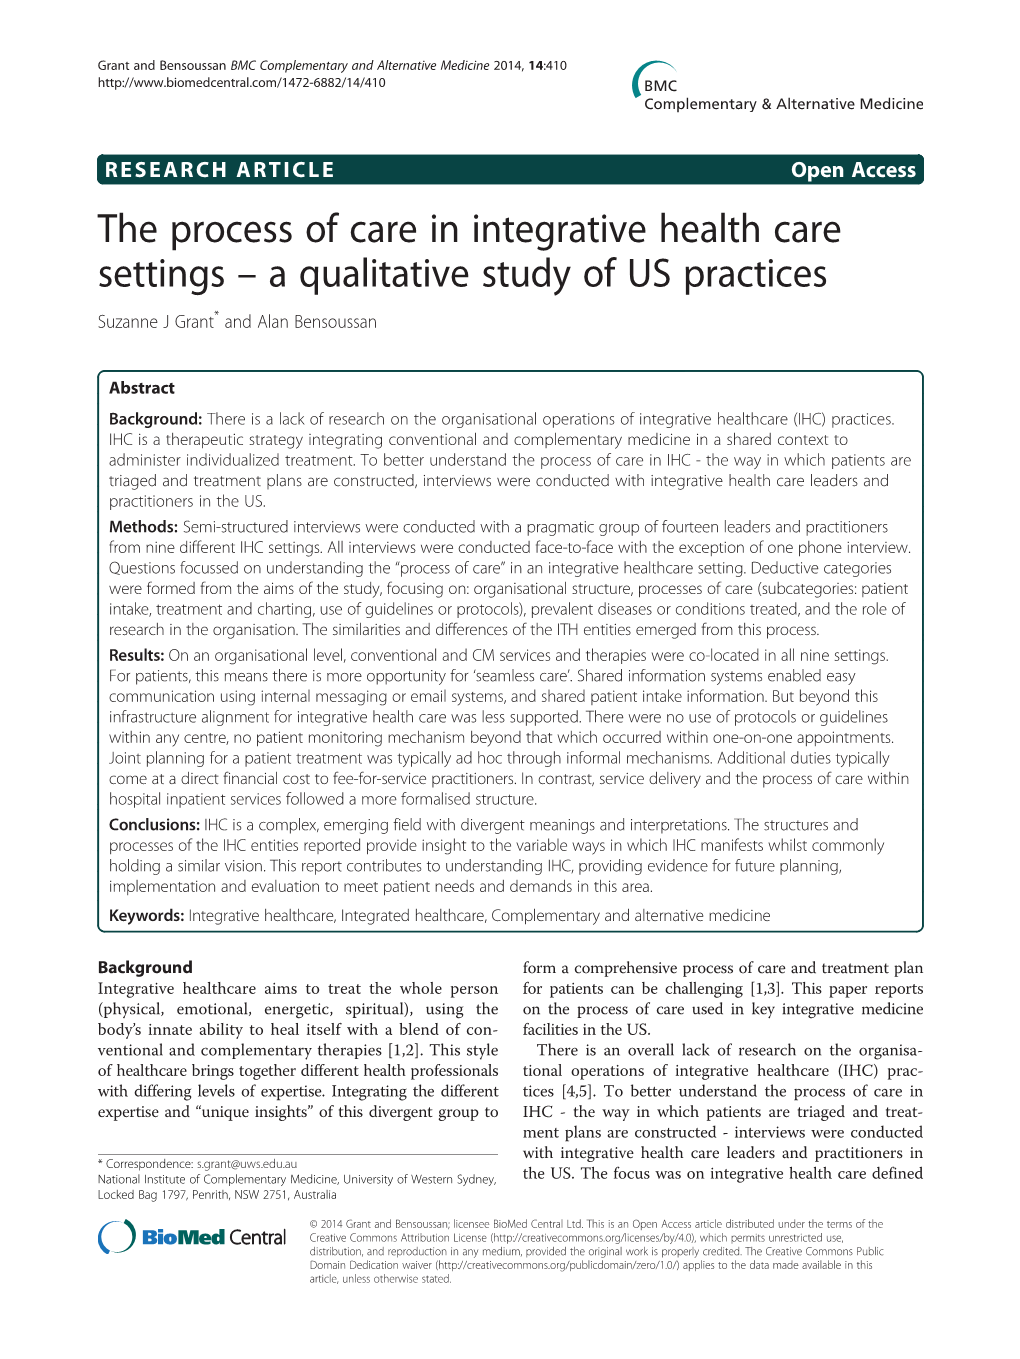 The Process of Care in Integrative Health Care Settings – a Qualitative Study of US Practices Suzanne J Grant* and Alan Bensoussan